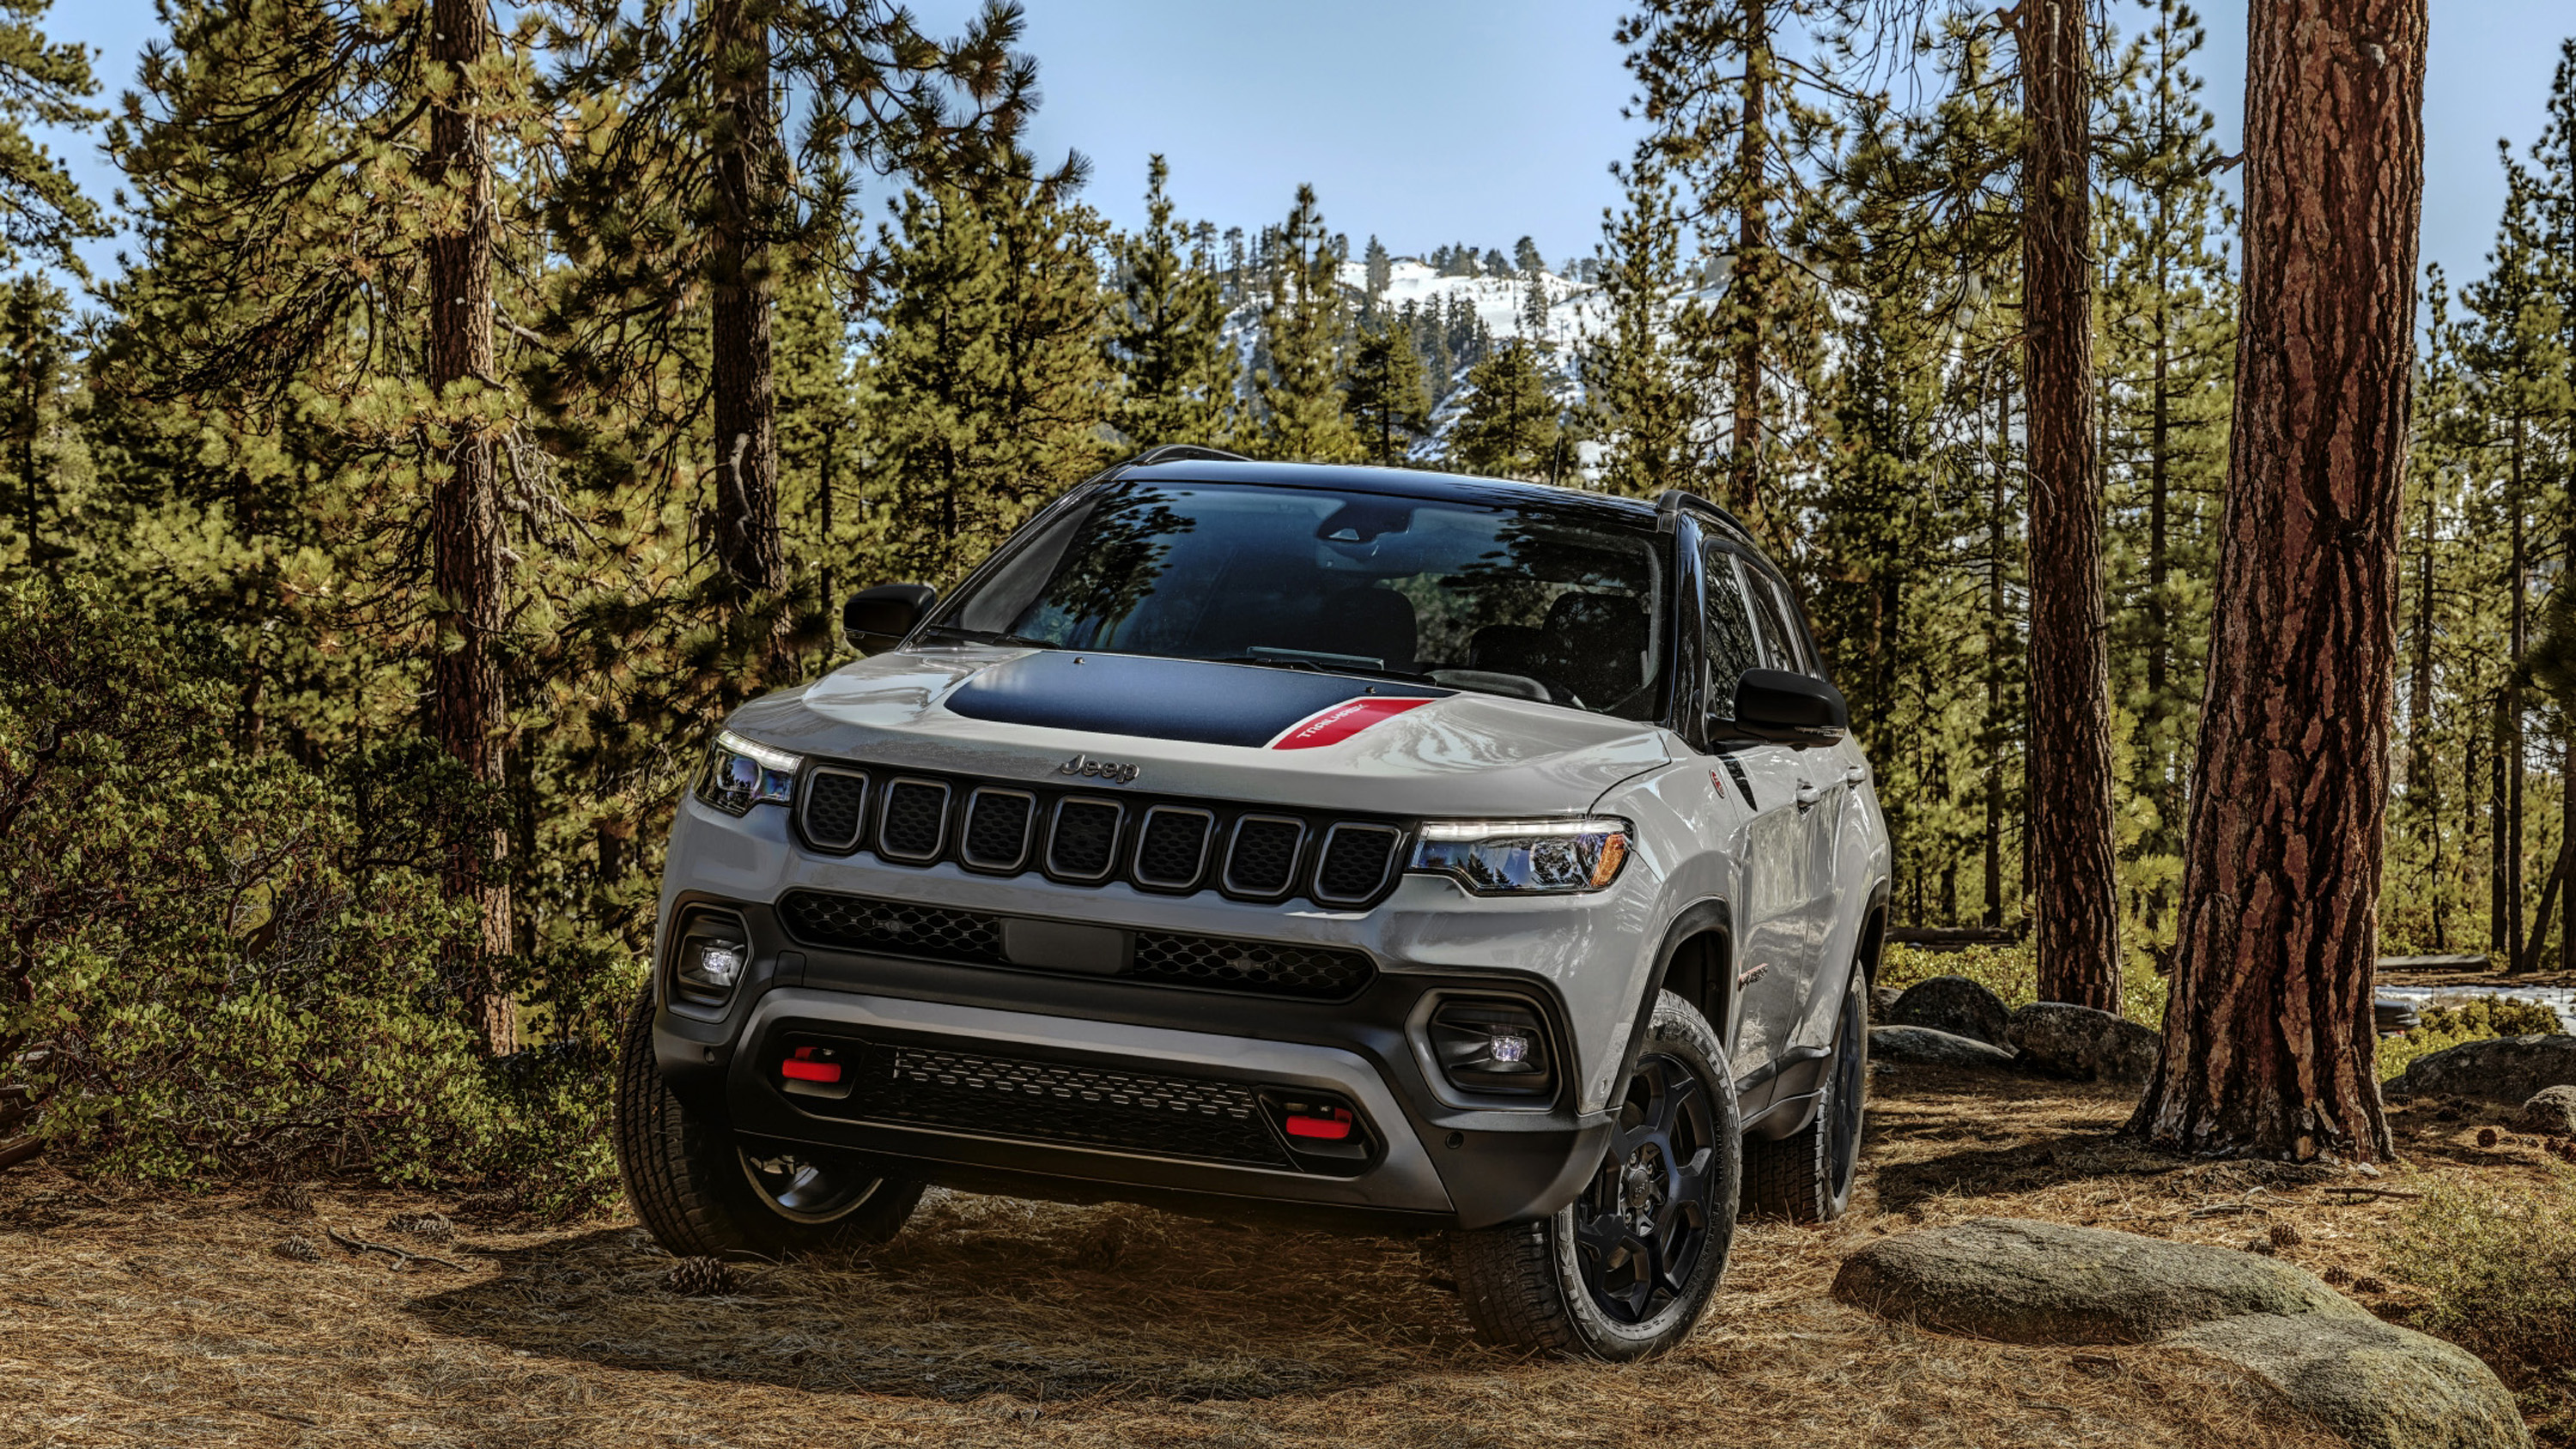 Jeep Compass SUV: Models, Generations and Details